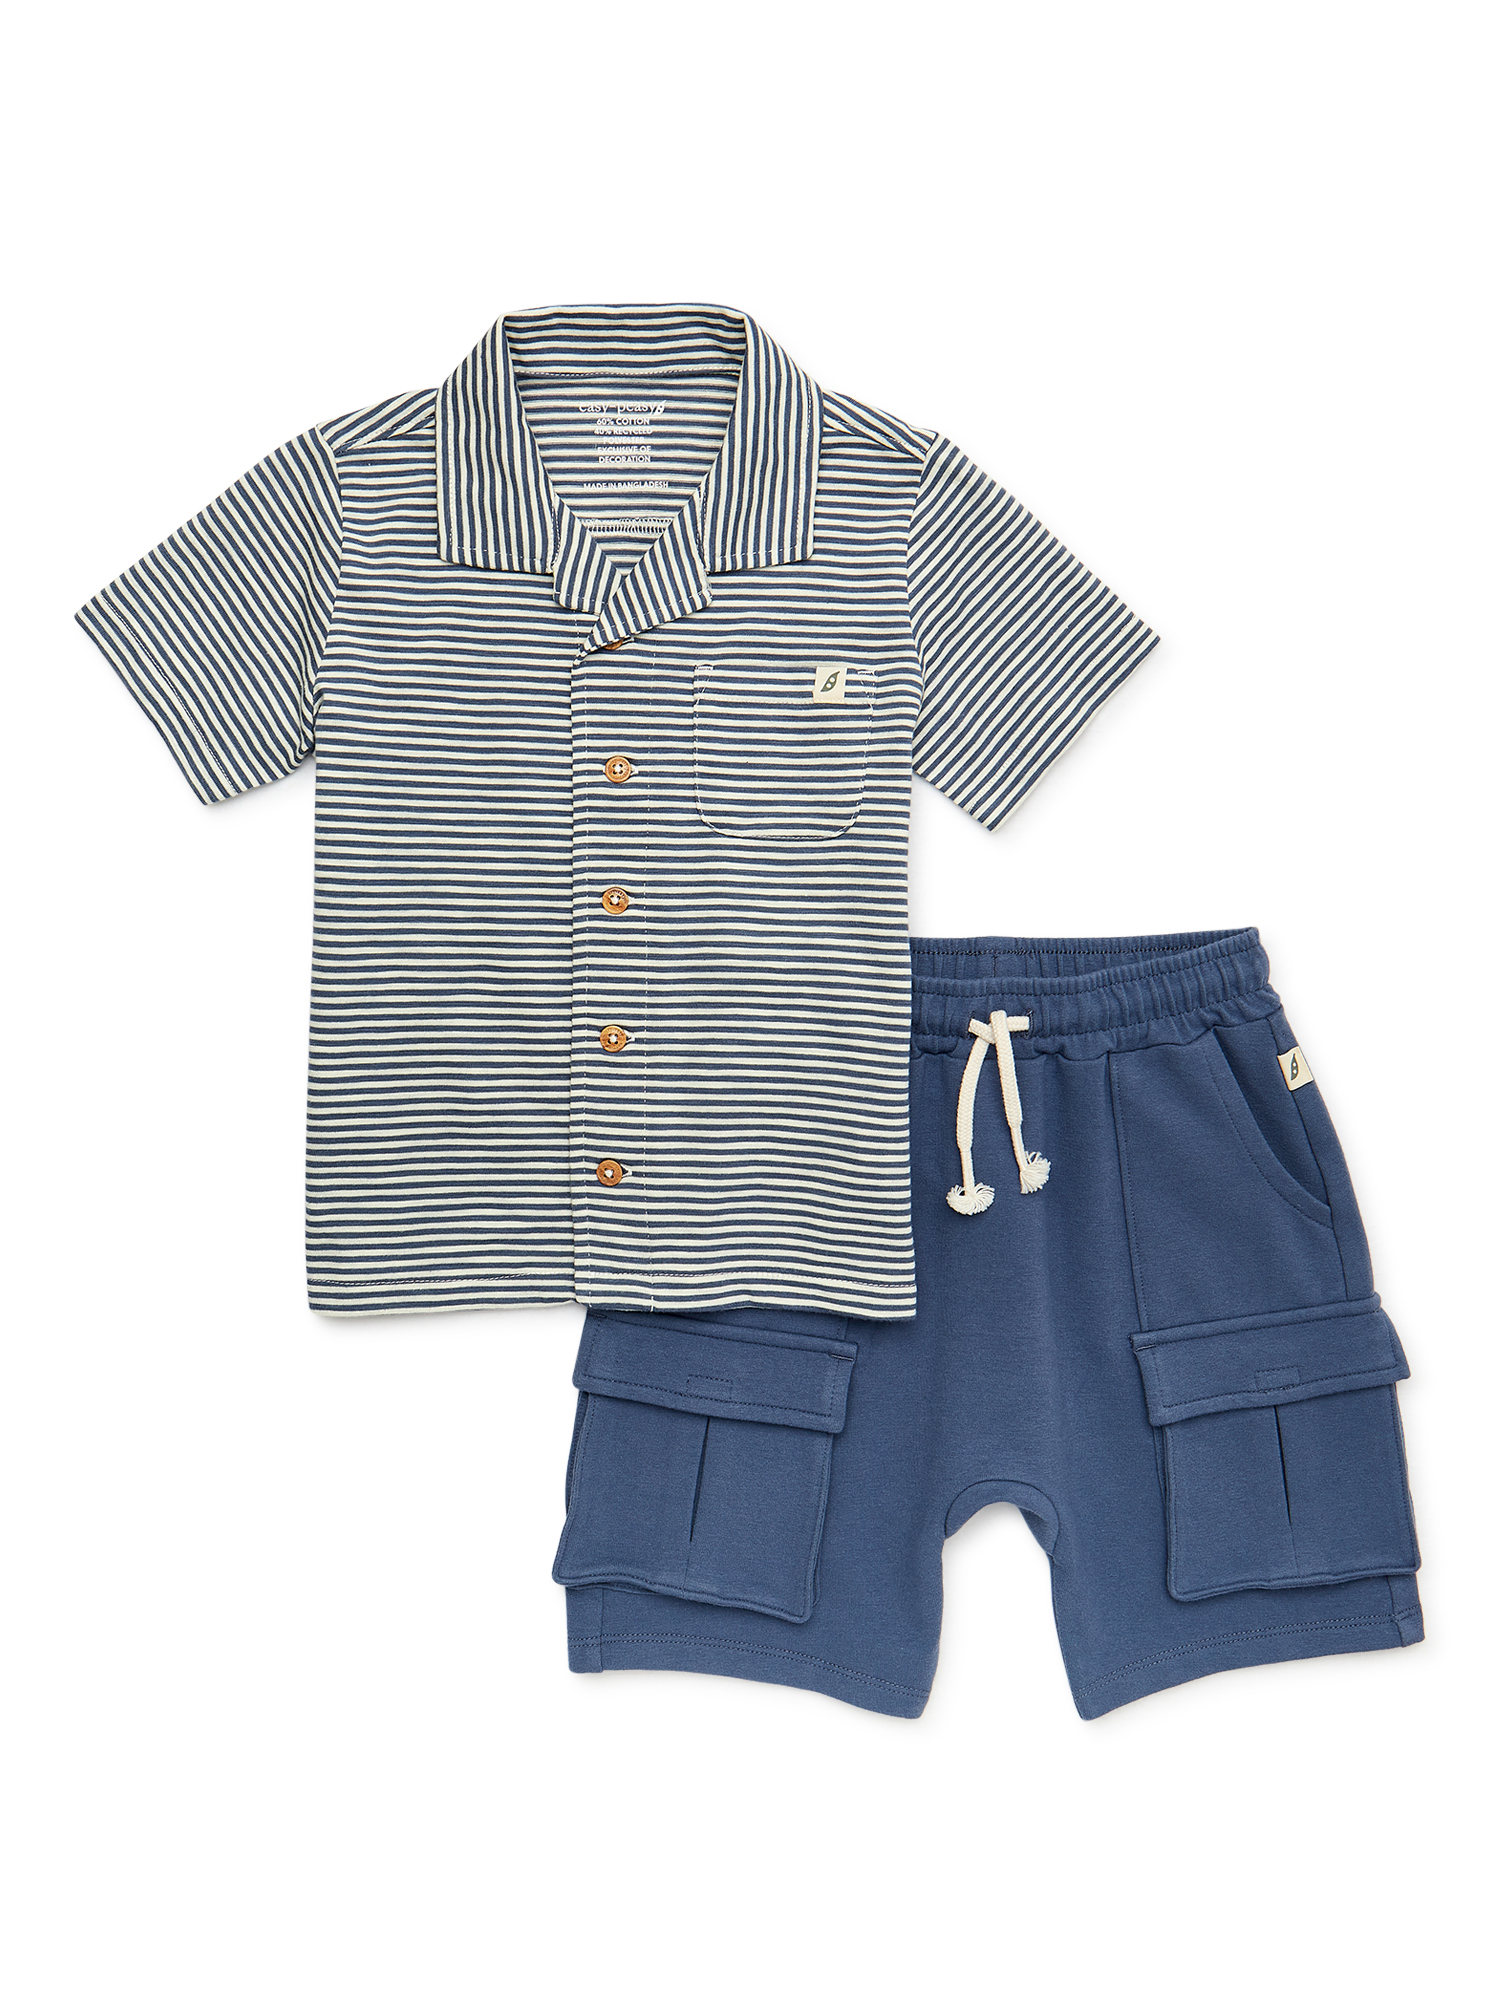 easy-peasy Toddler Boys Camp Shirt and Shorts Outfit Set, 2-Piece, Sizes 12M-5T - image 1 of 4